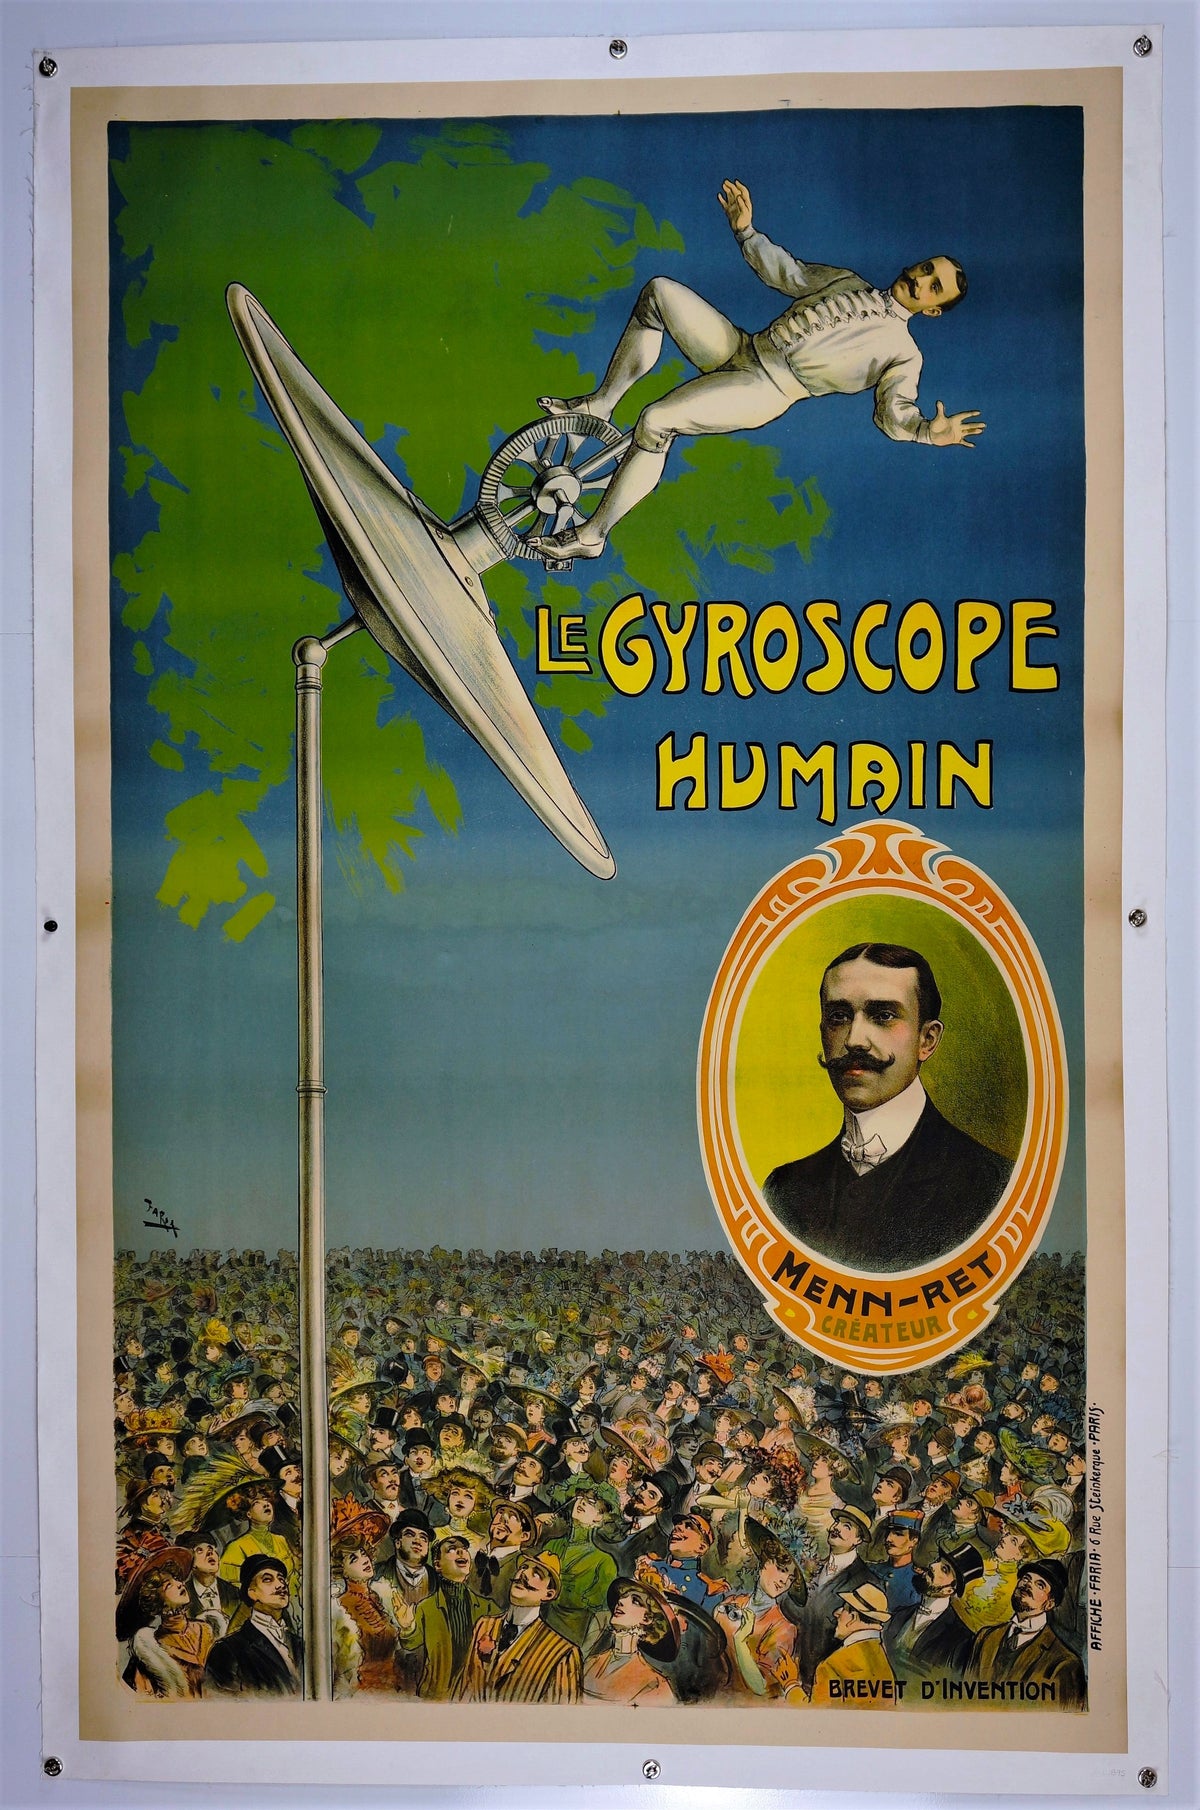 Le Gyroscope Humain - Authentic Vintage Poster